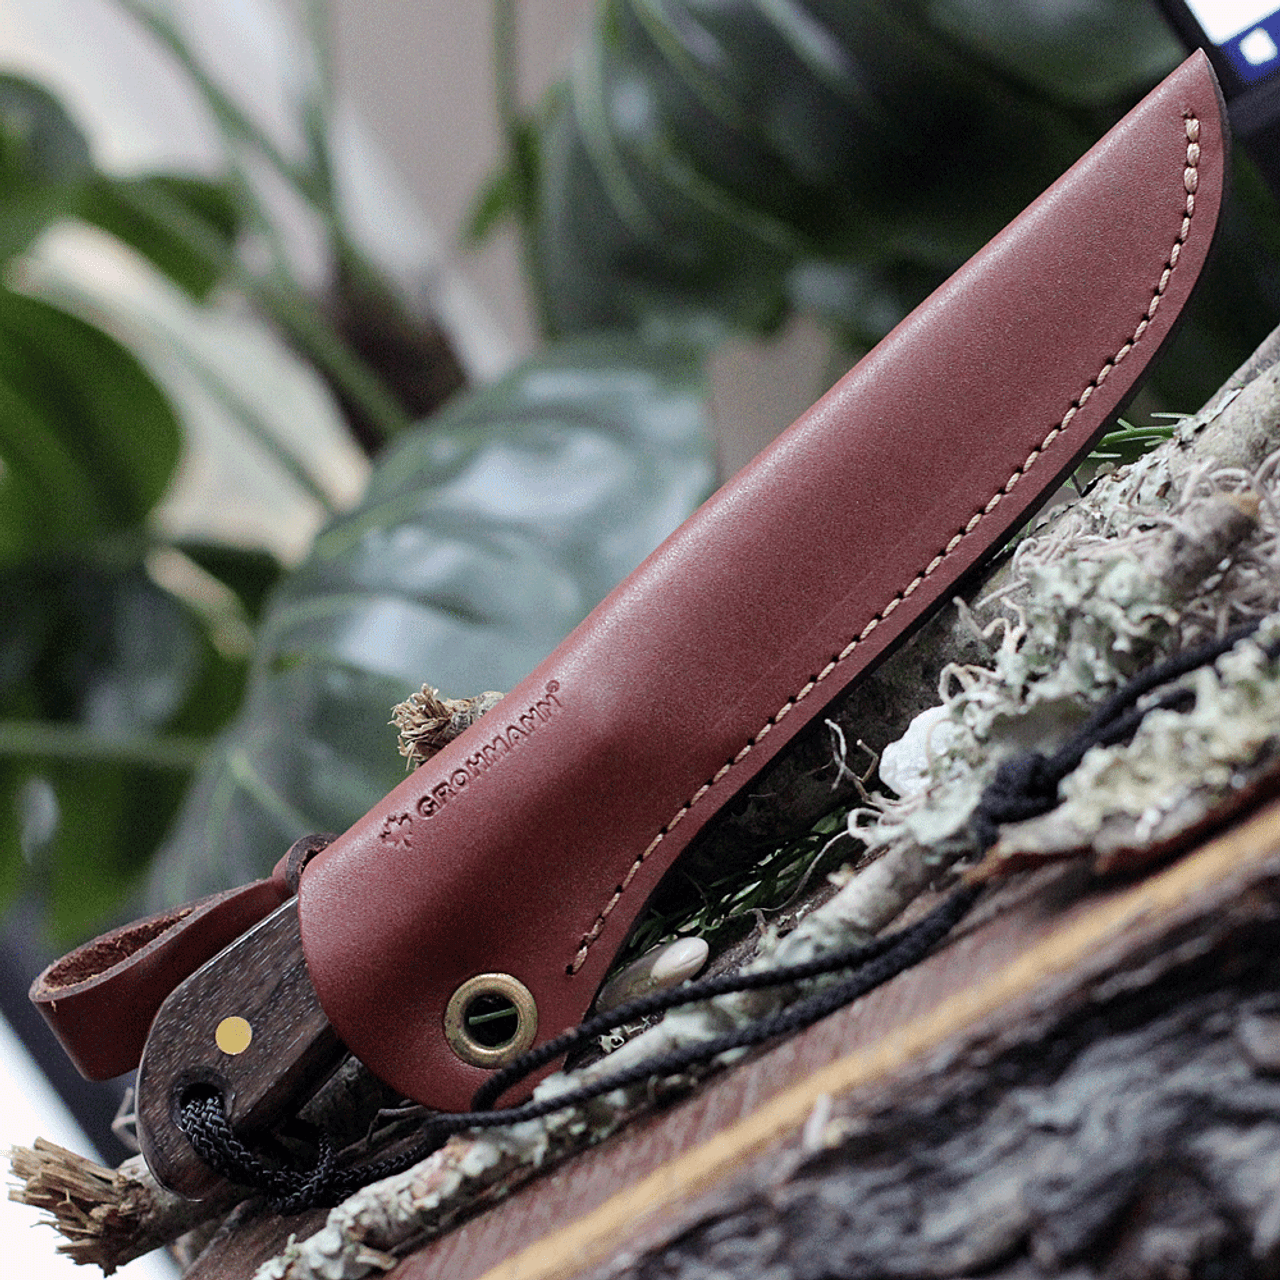 Grohmann Knives #3 Boat Knife R3S, 4" Satin Stainless Steel Fixed Blade, Rosewood Handle w/Brown Leather Sheath